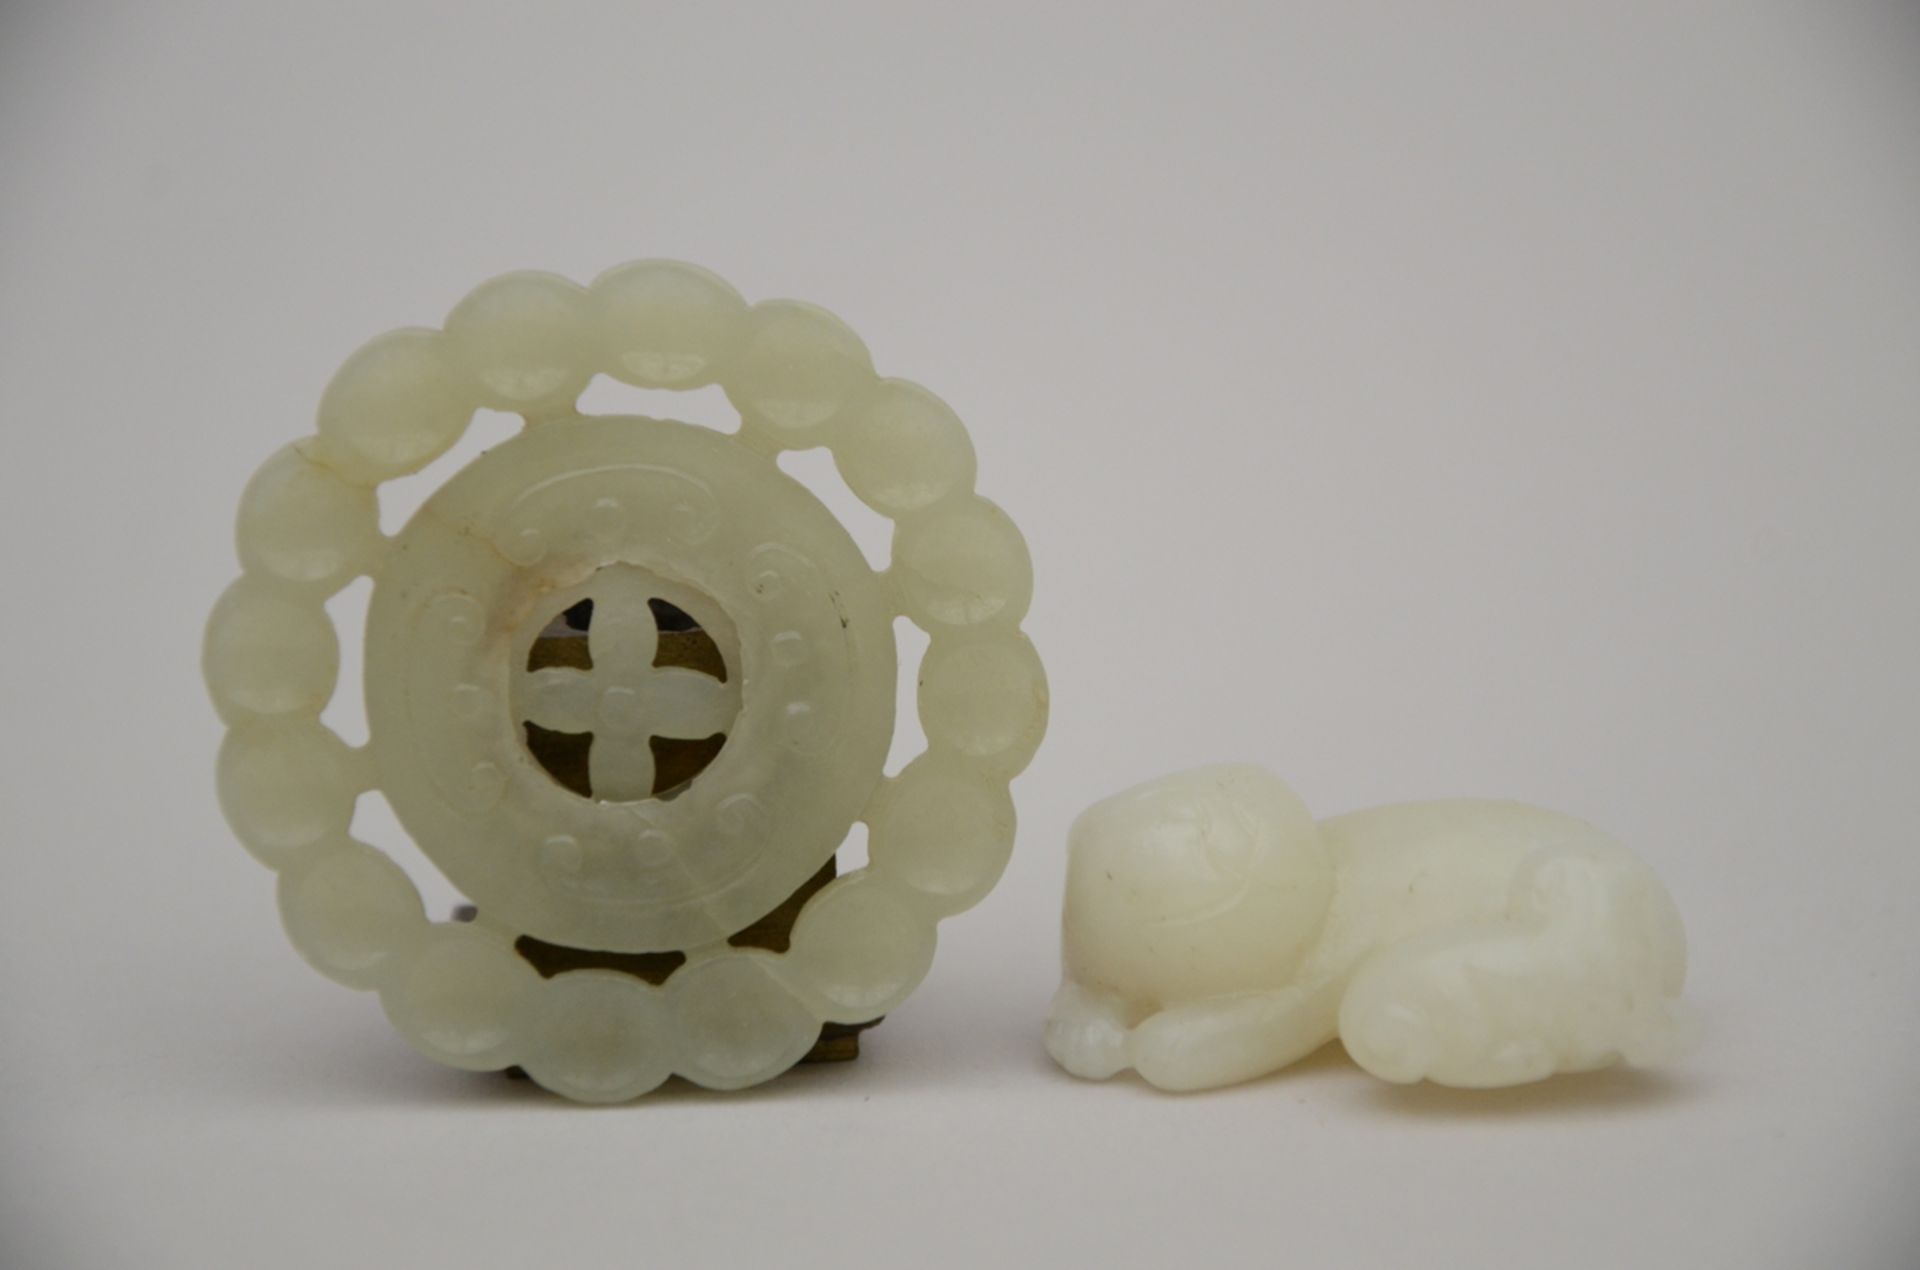 Lot: 2 Chinese sculptures in jade 'tiger with cub' (2x3x4cm) and bi disc (dia 5.5cm) (*)